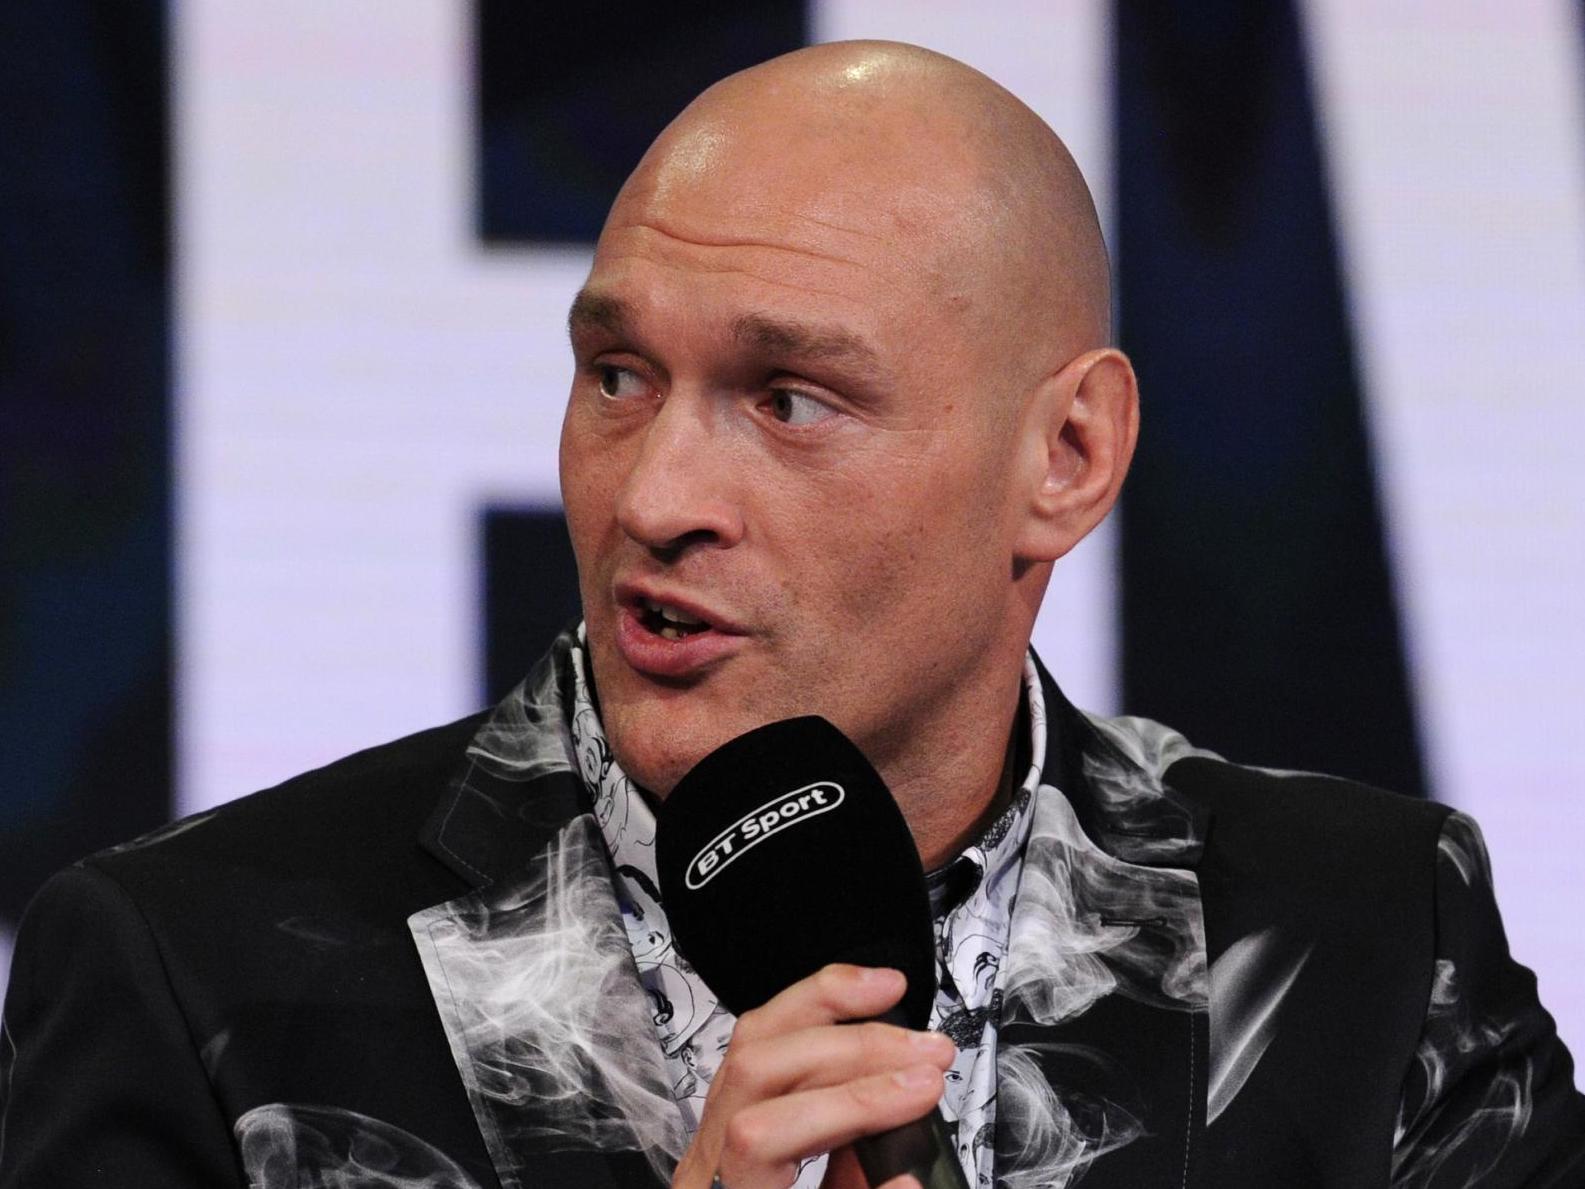 Tyson Fury is represented by MTK Global, Top Rank and Queensbury Promotions